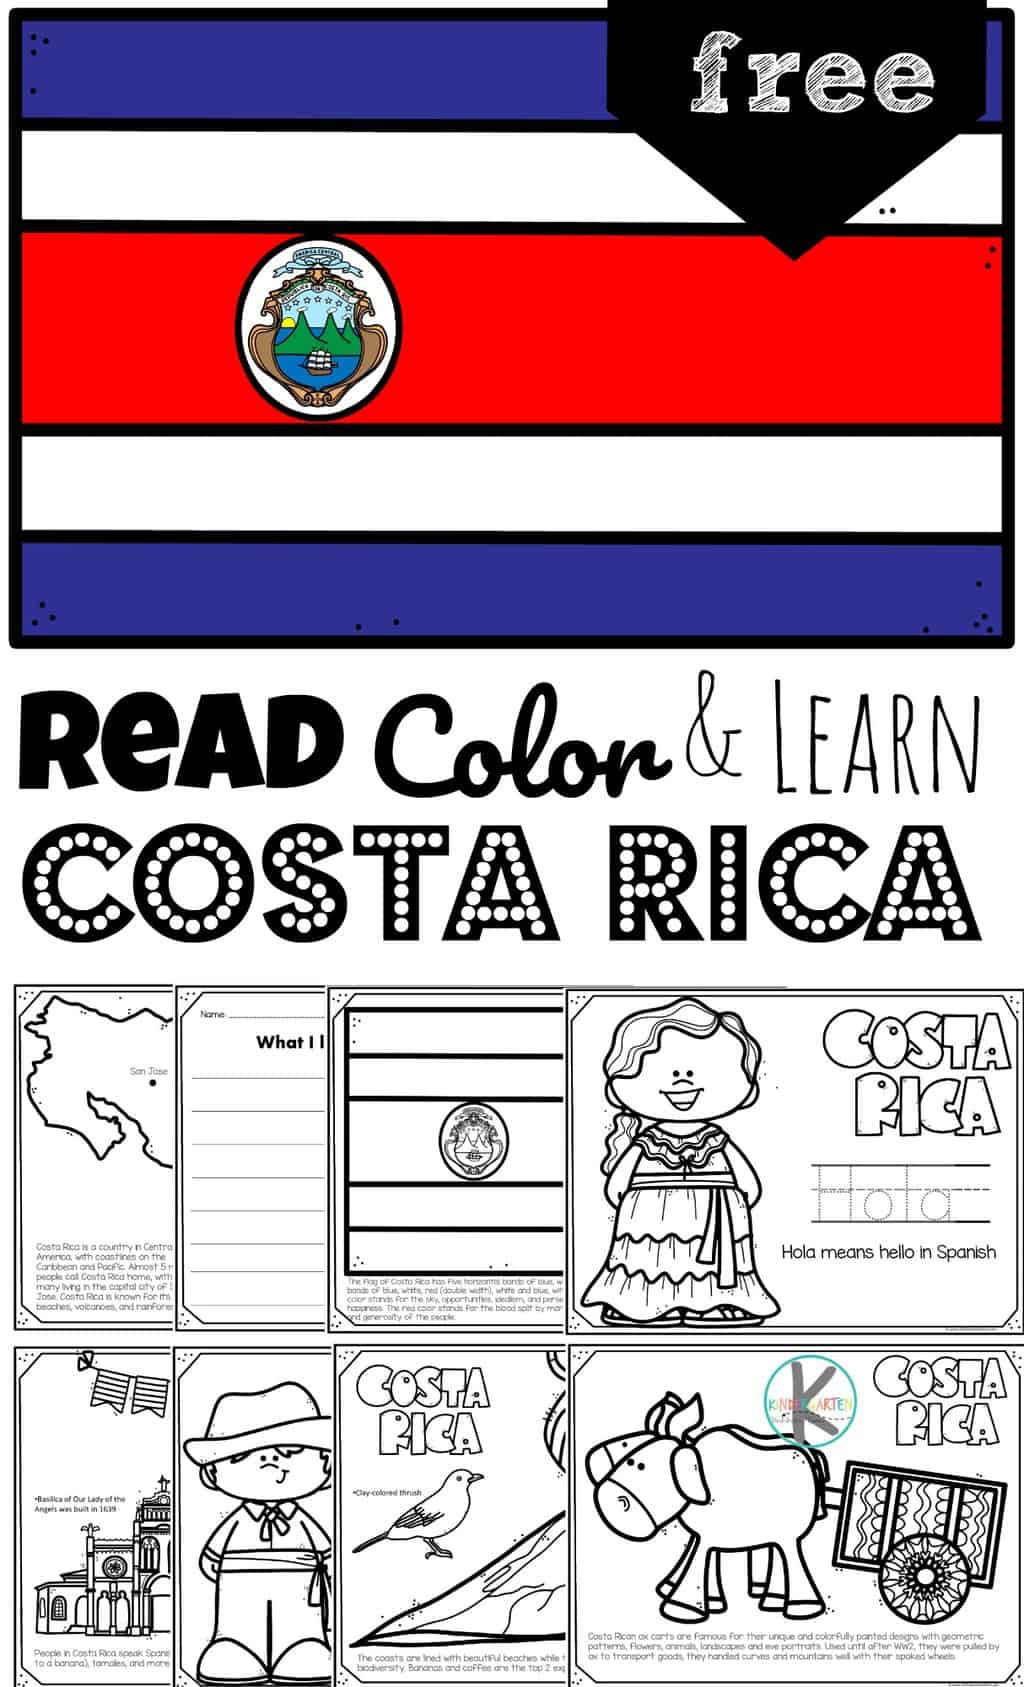 Free costa rica coloring pages